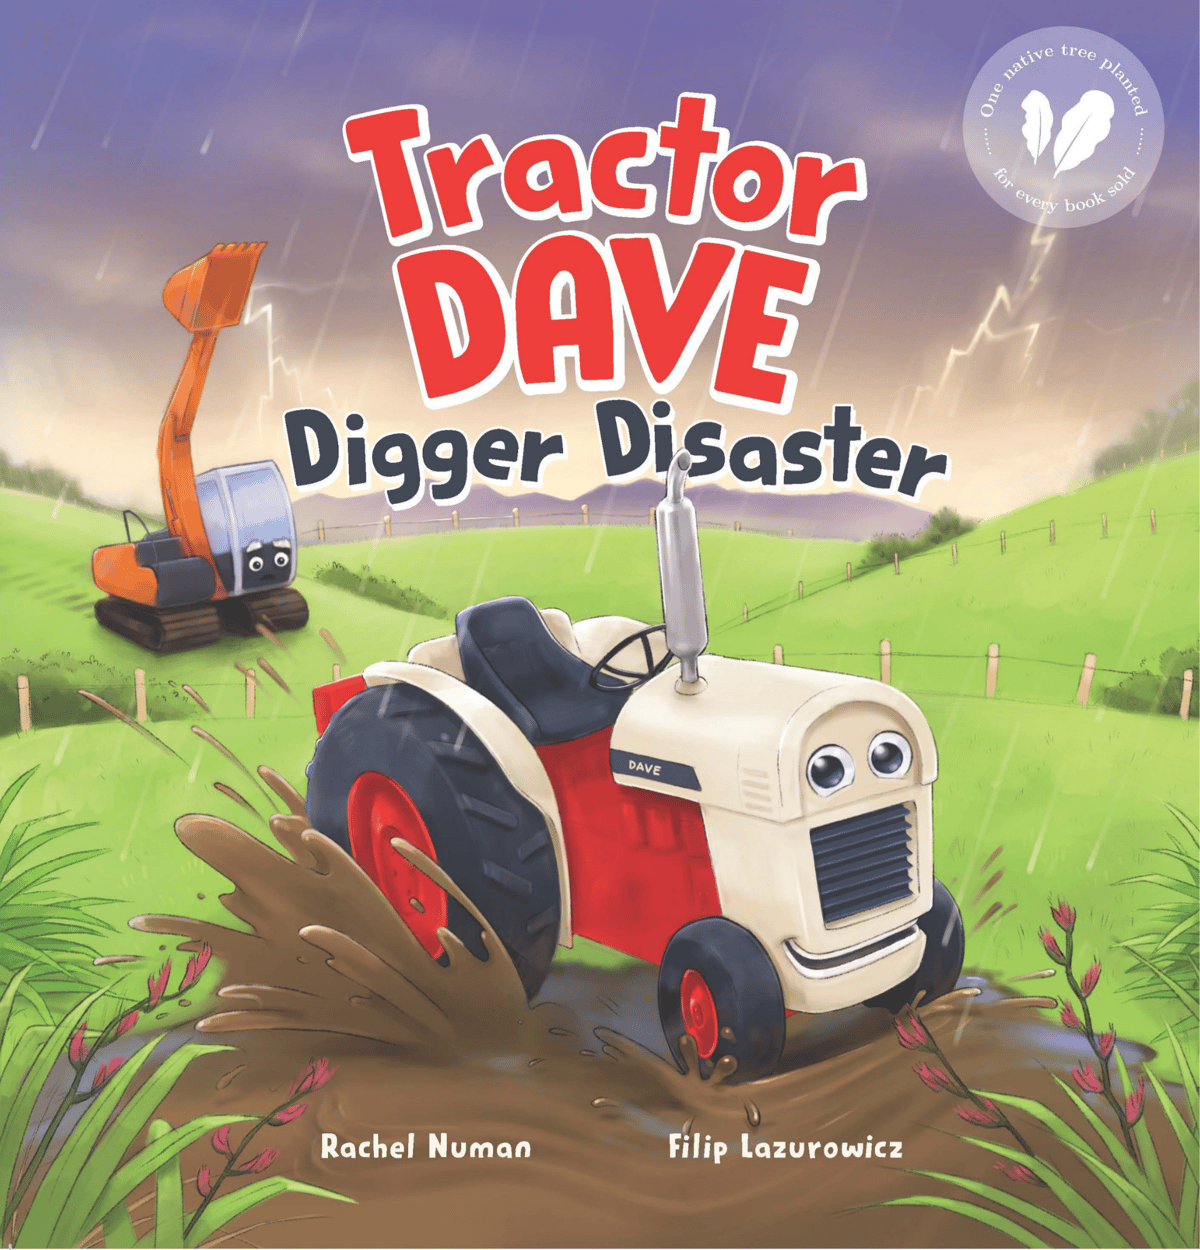 Tractor Dave - Digger Disaster